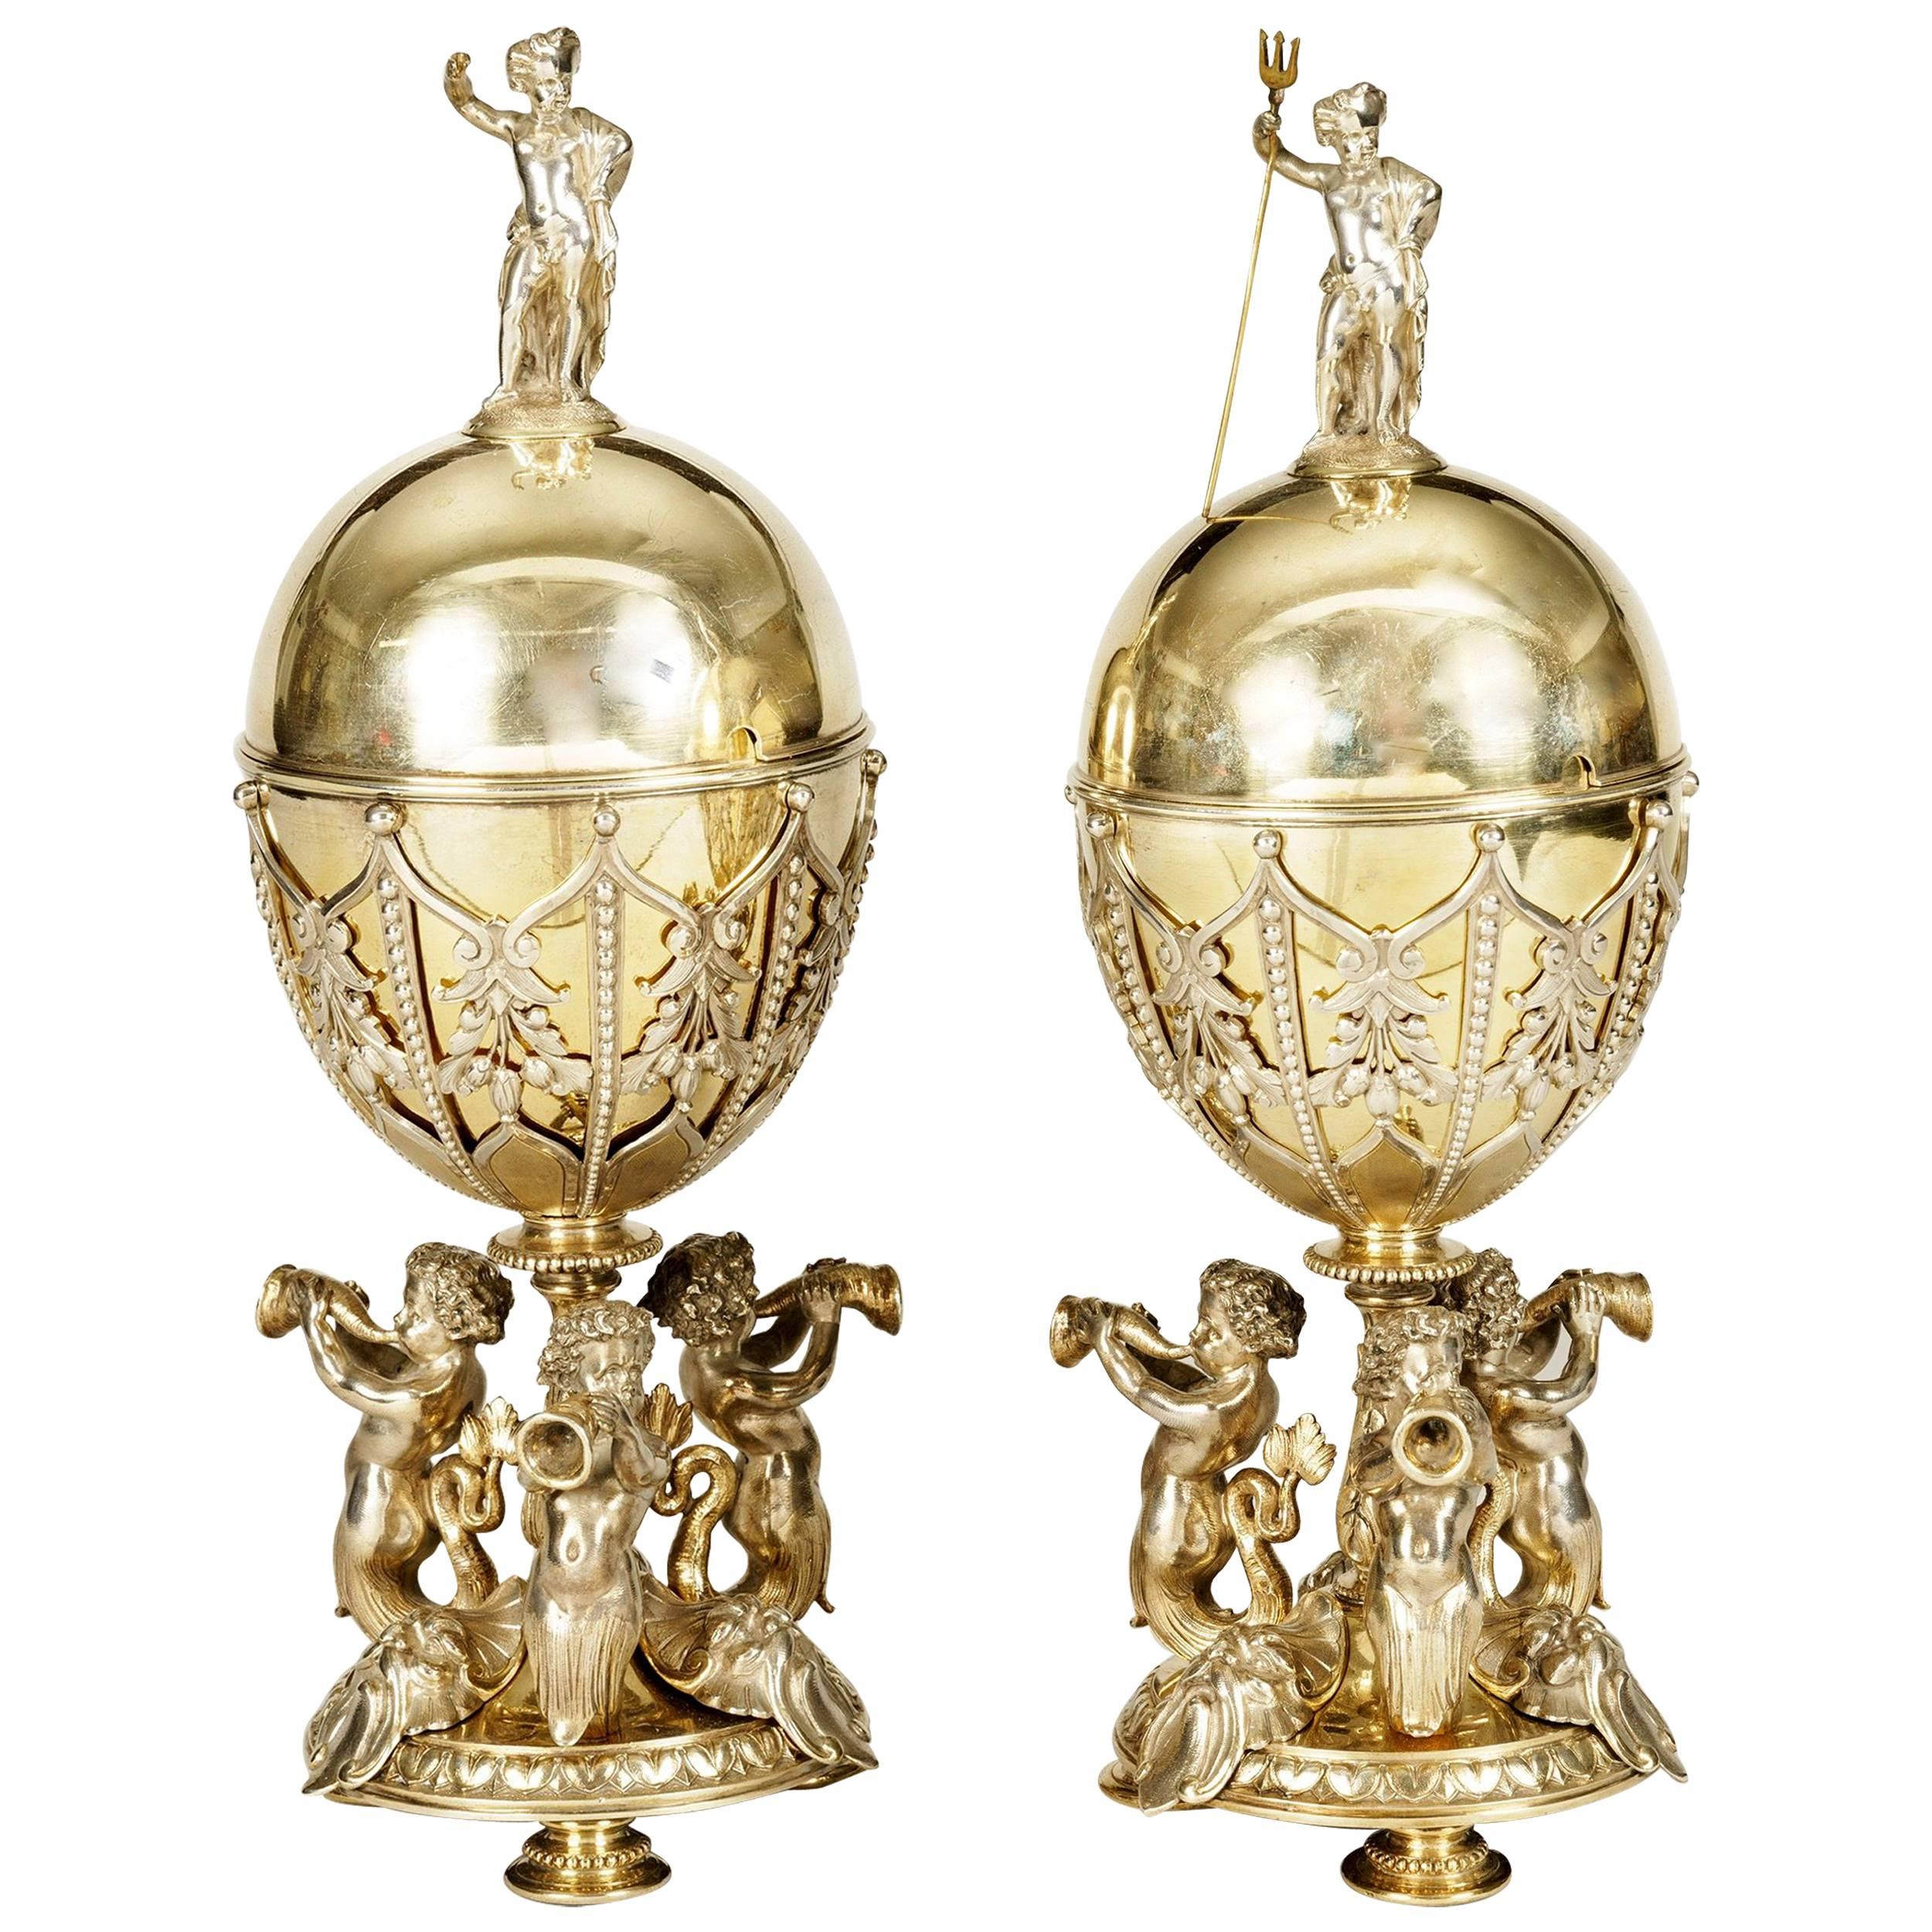 19th Century Pair of Elkington & Company Silver Plated Lidded Chalices For Sale